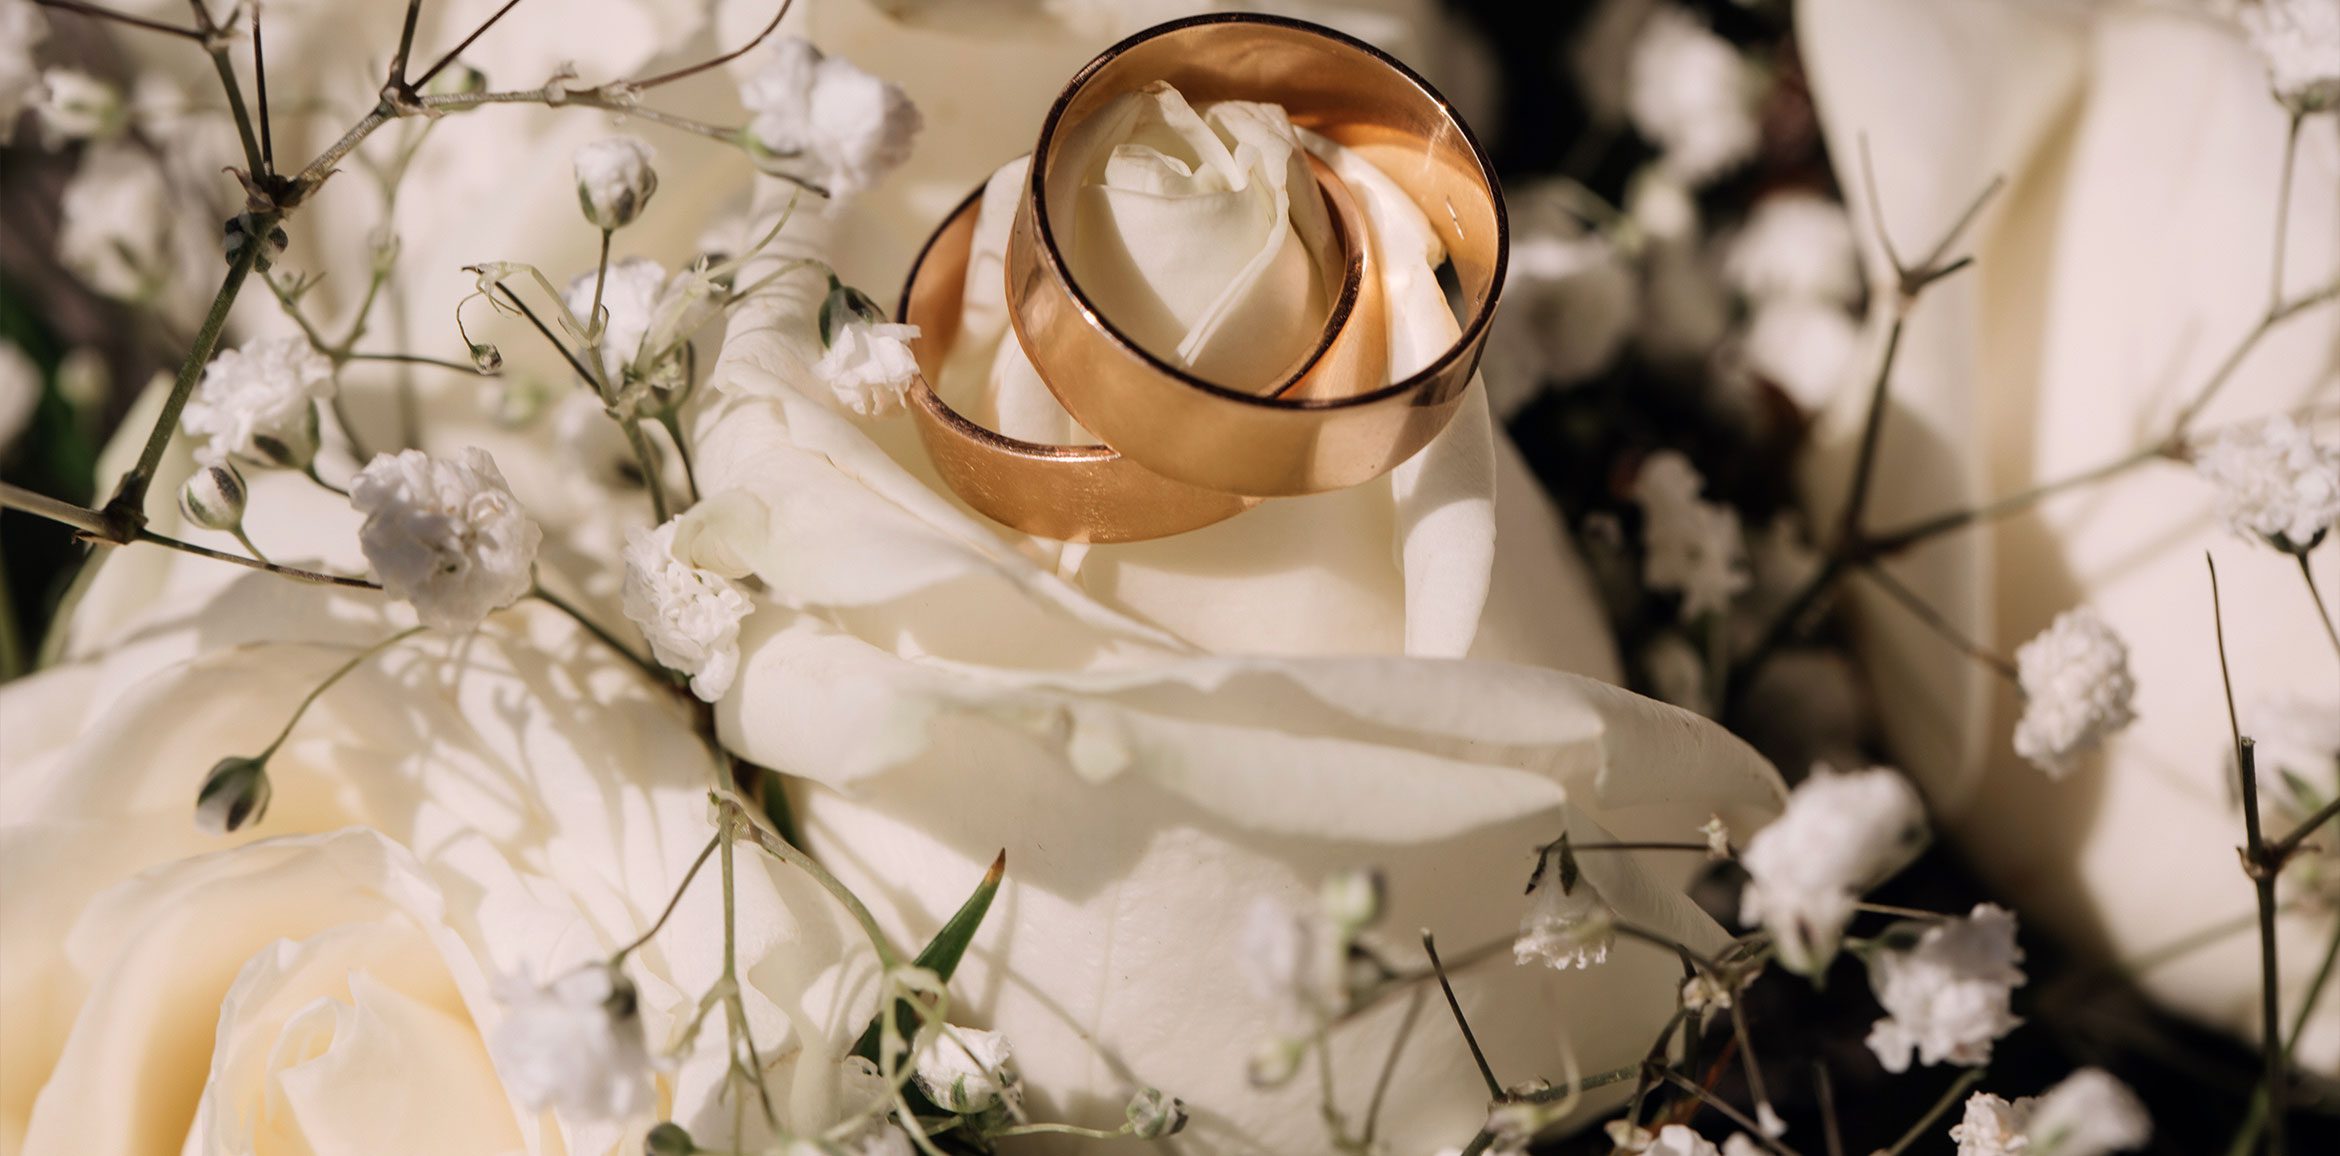 Two Wedding Rings on Fabric and Flowers